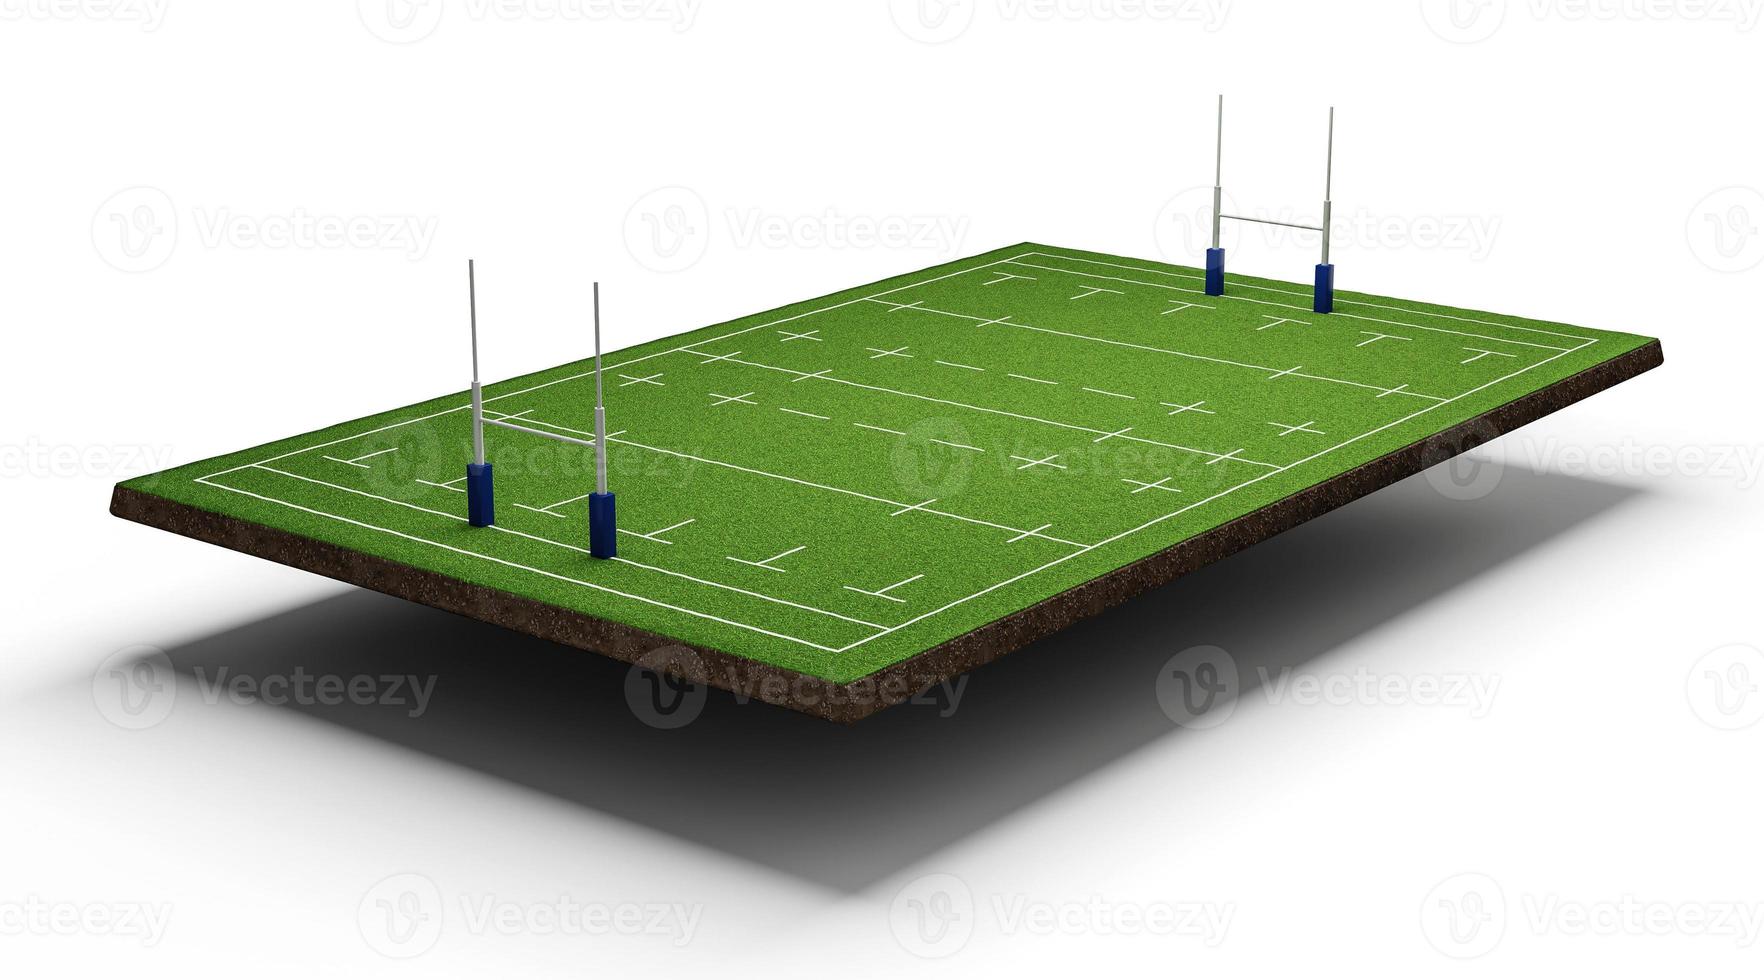 American football field Ground cross section with green Rugby stadium grass field 3d illustration photo